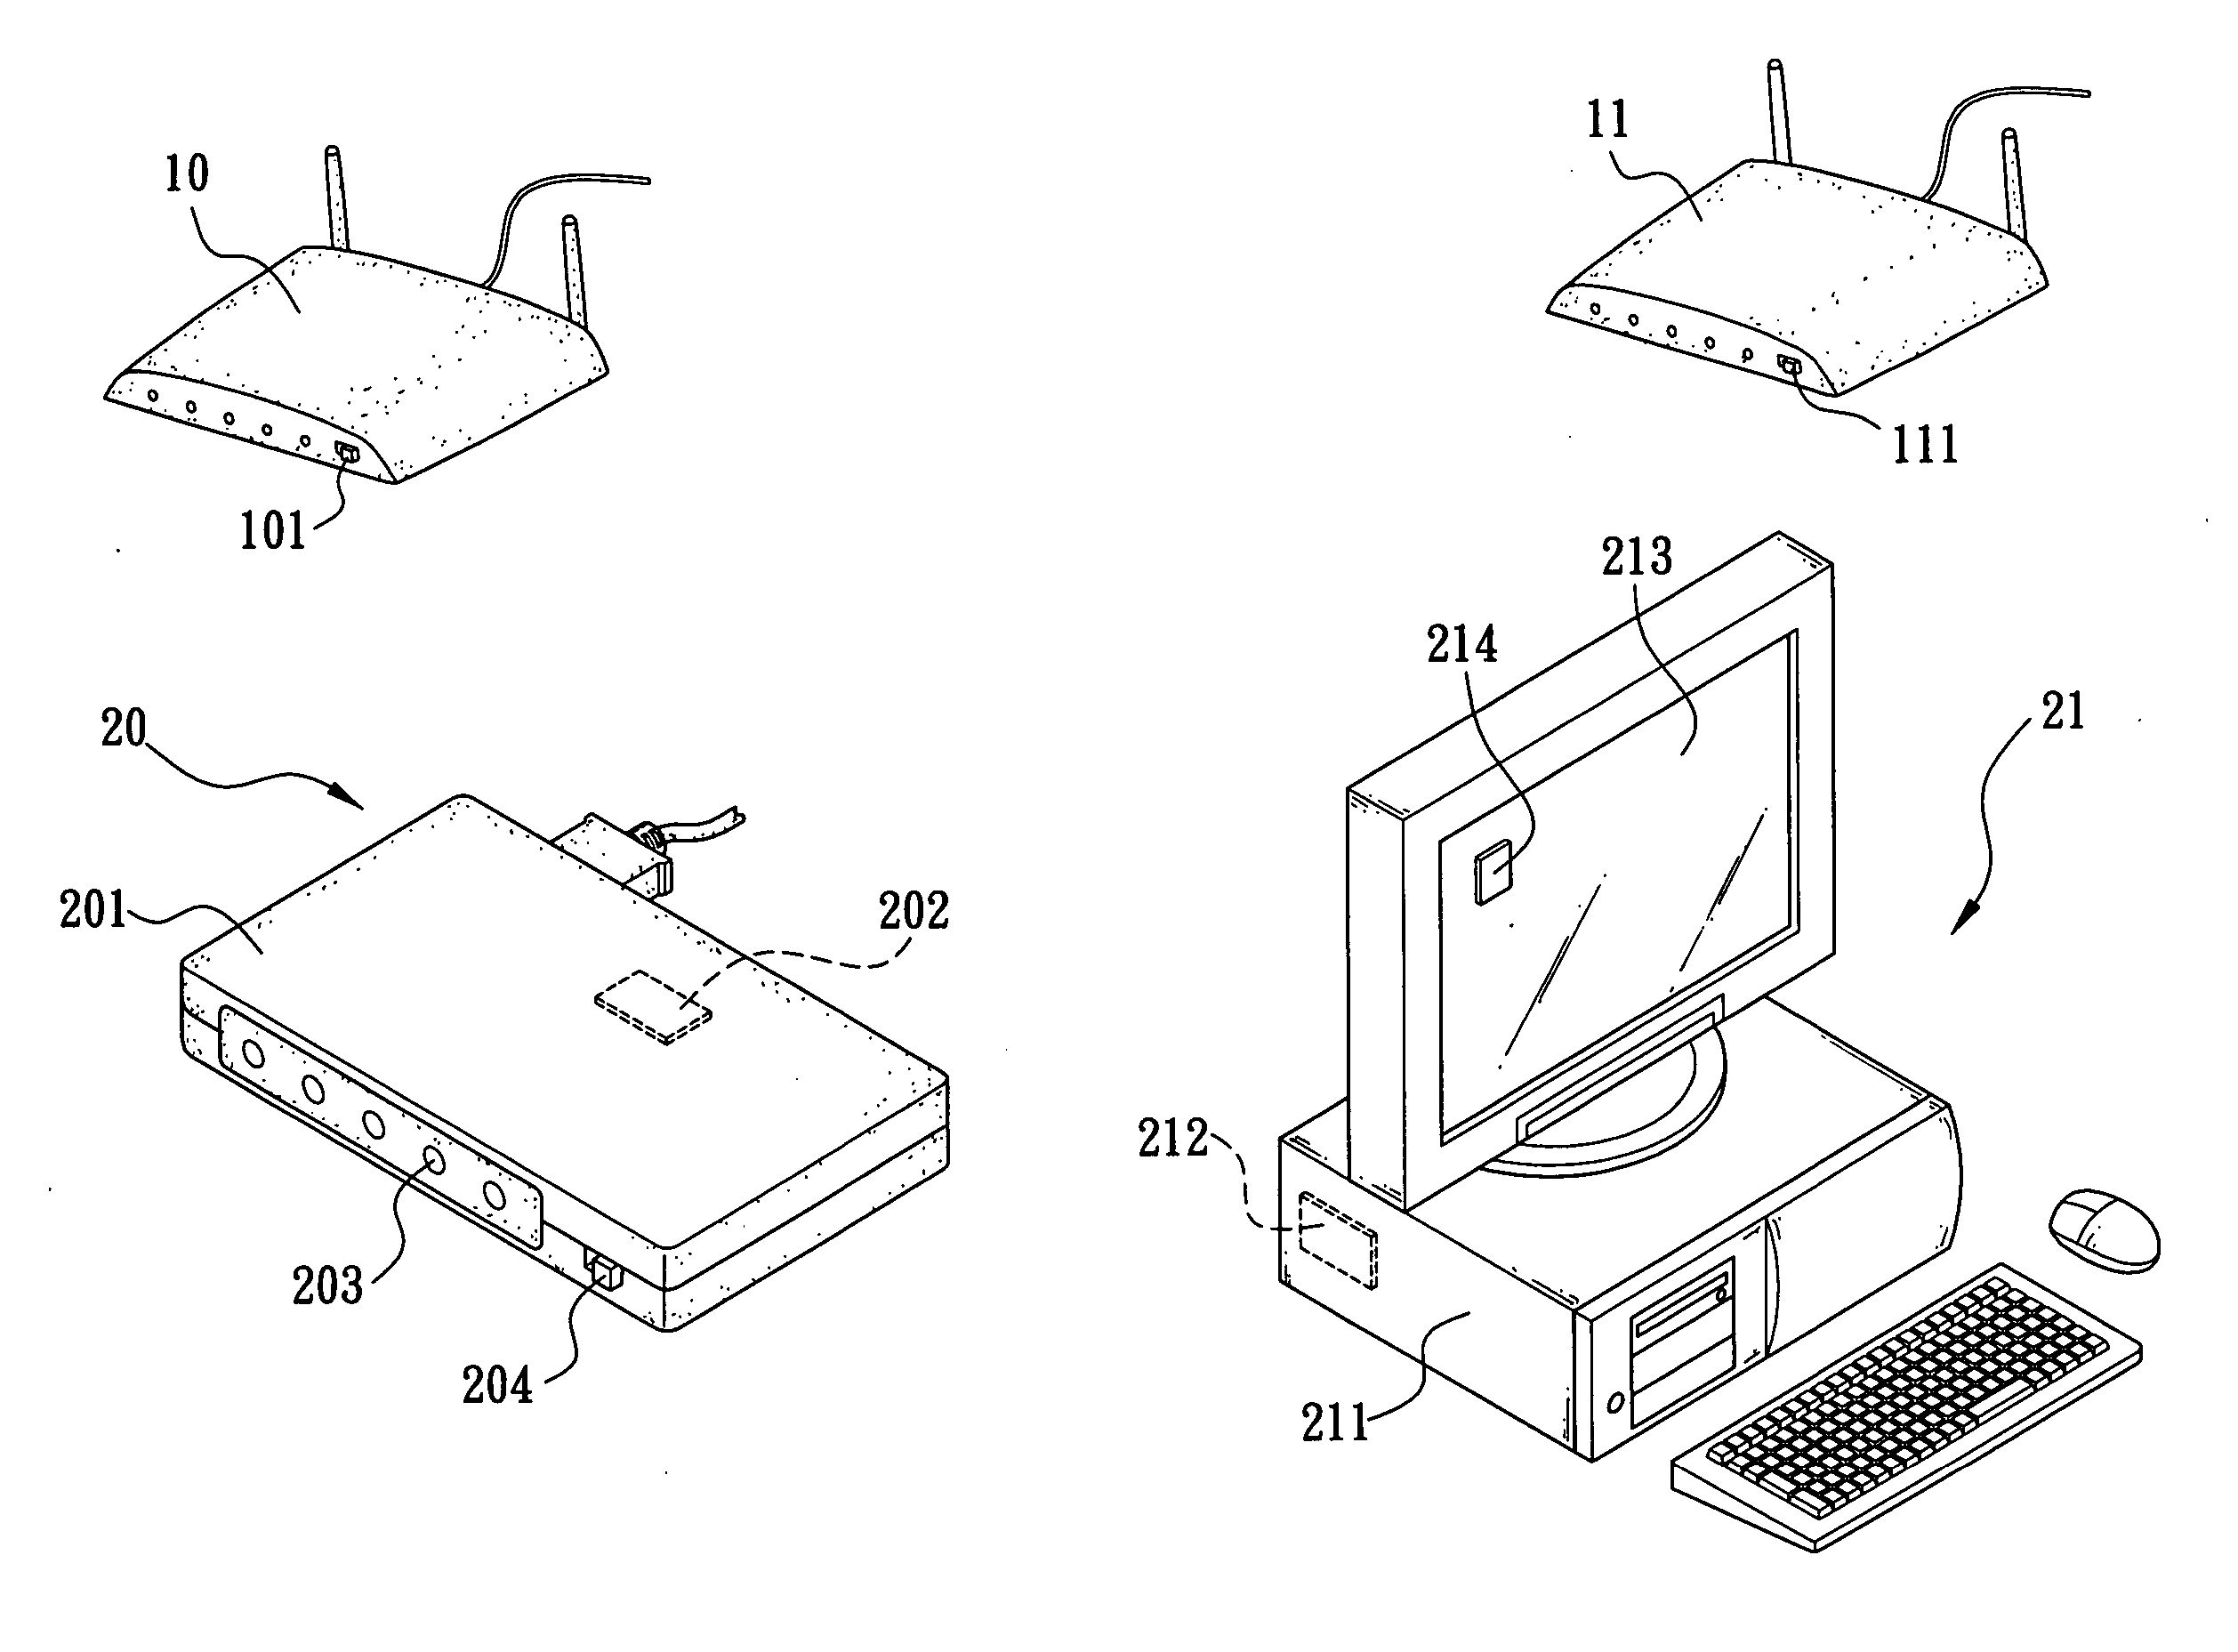 Secure connection mechanism capable of automatically negotiating password between wireless client terminal and wireless access terminal